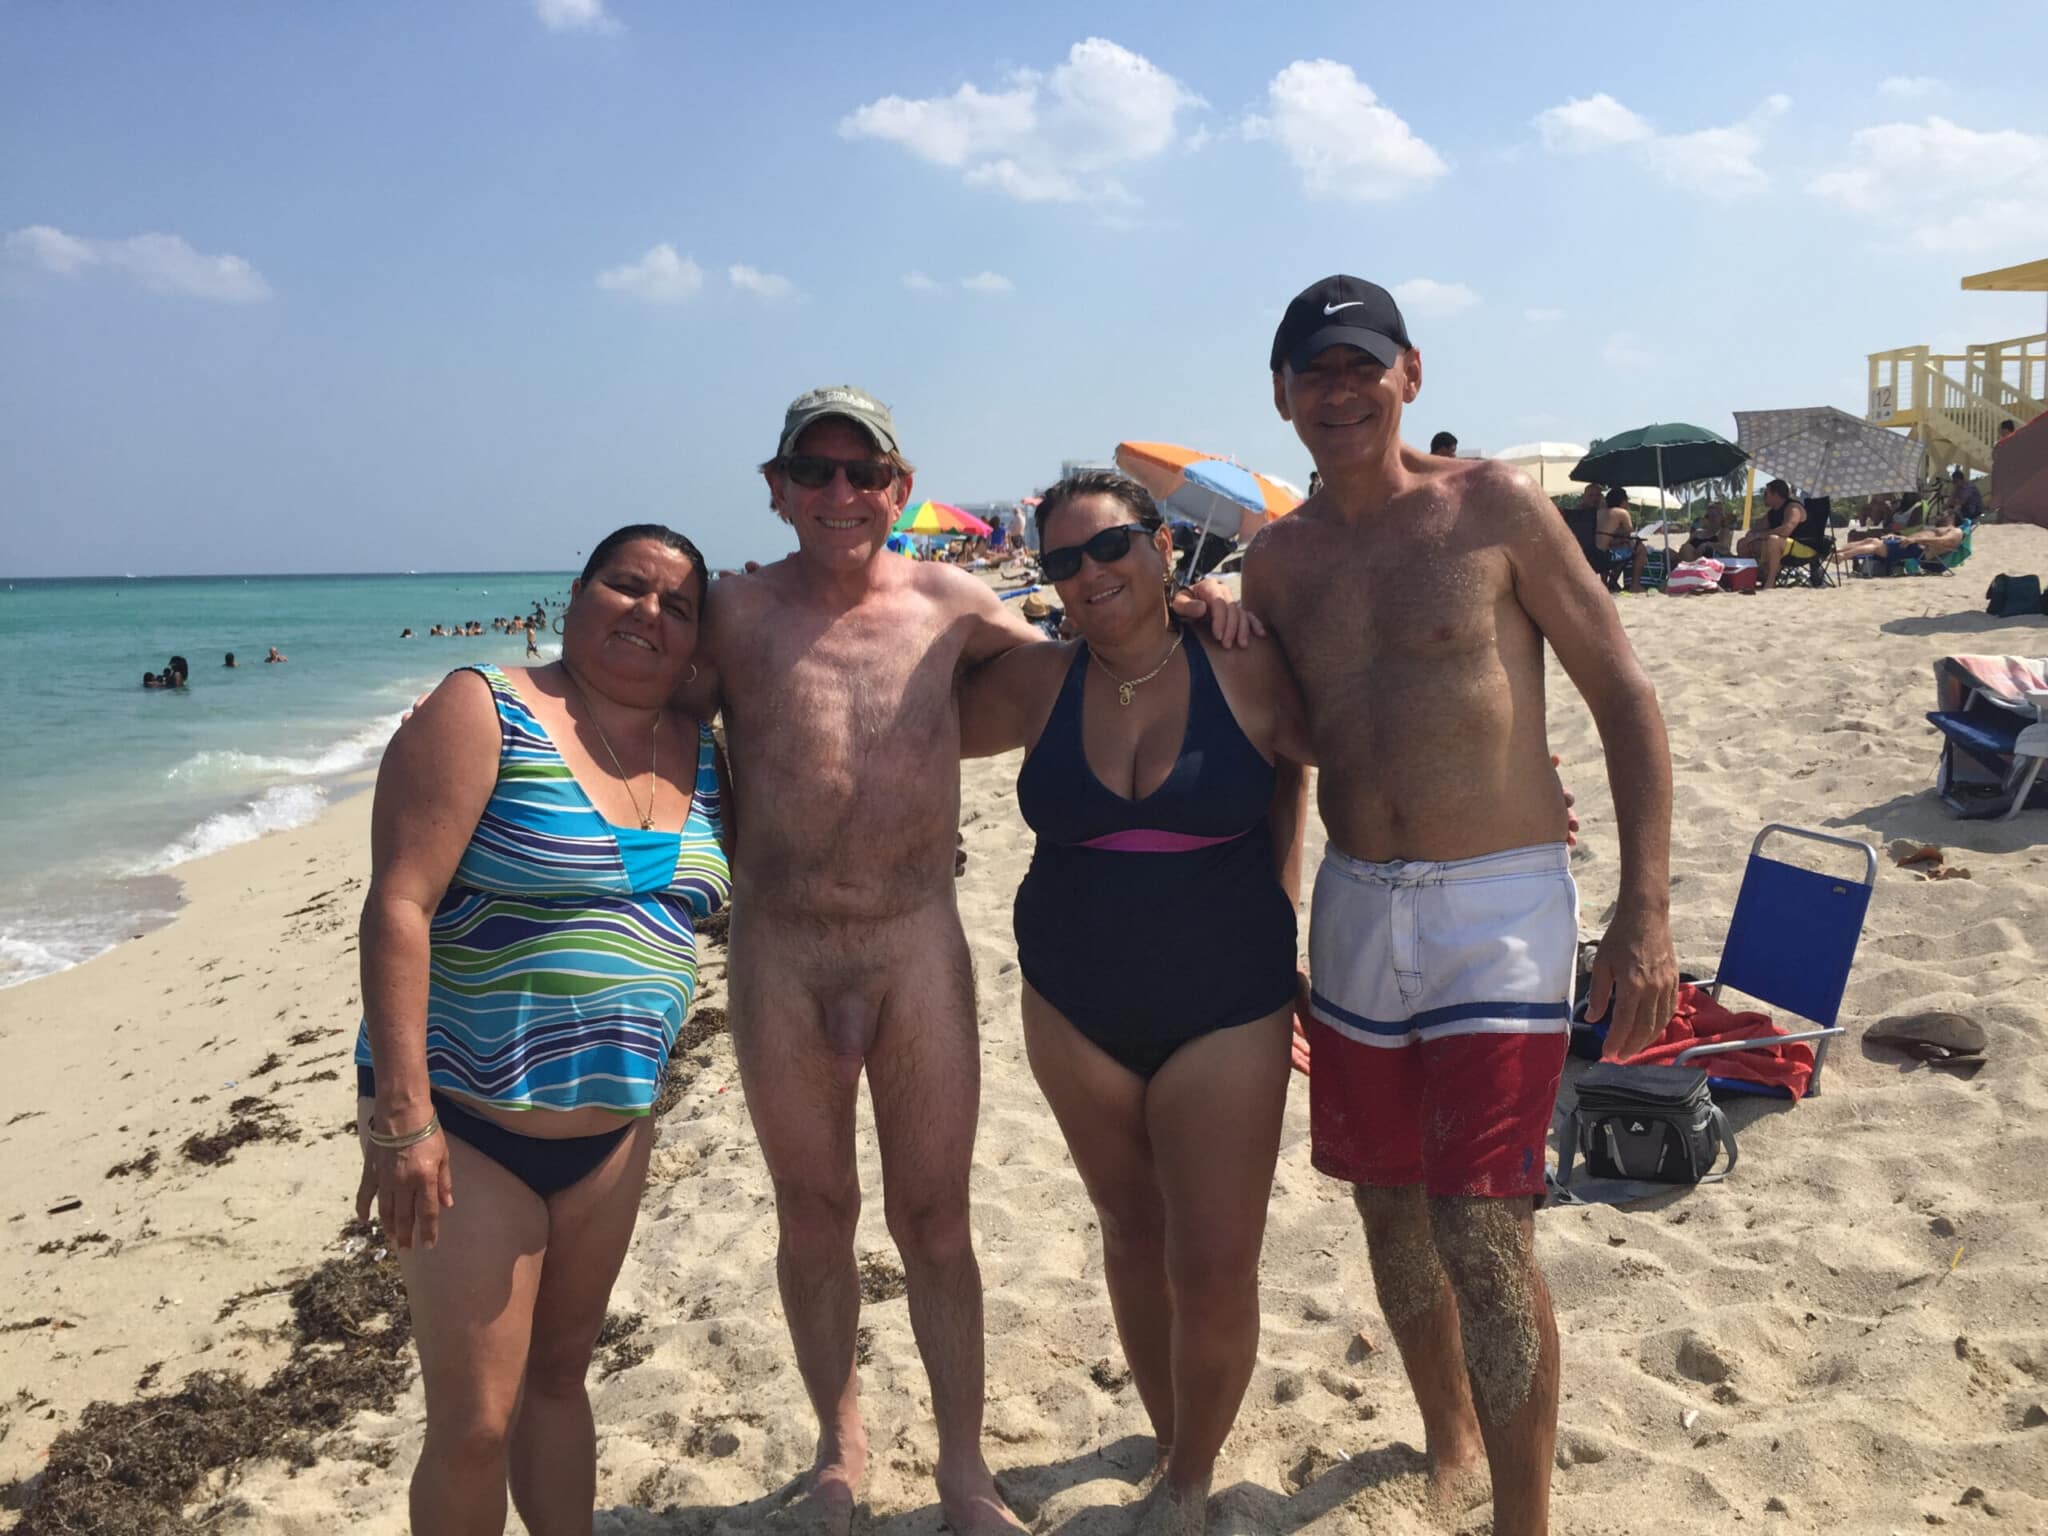 Cuban Tourist Dick Flash Pics, Nude Beach Pics, Public Nudity Pics, Real Amateurs from Google, Tumblr, Pinterest, Facebook, Twitter, Instagram and Snapchat. photo